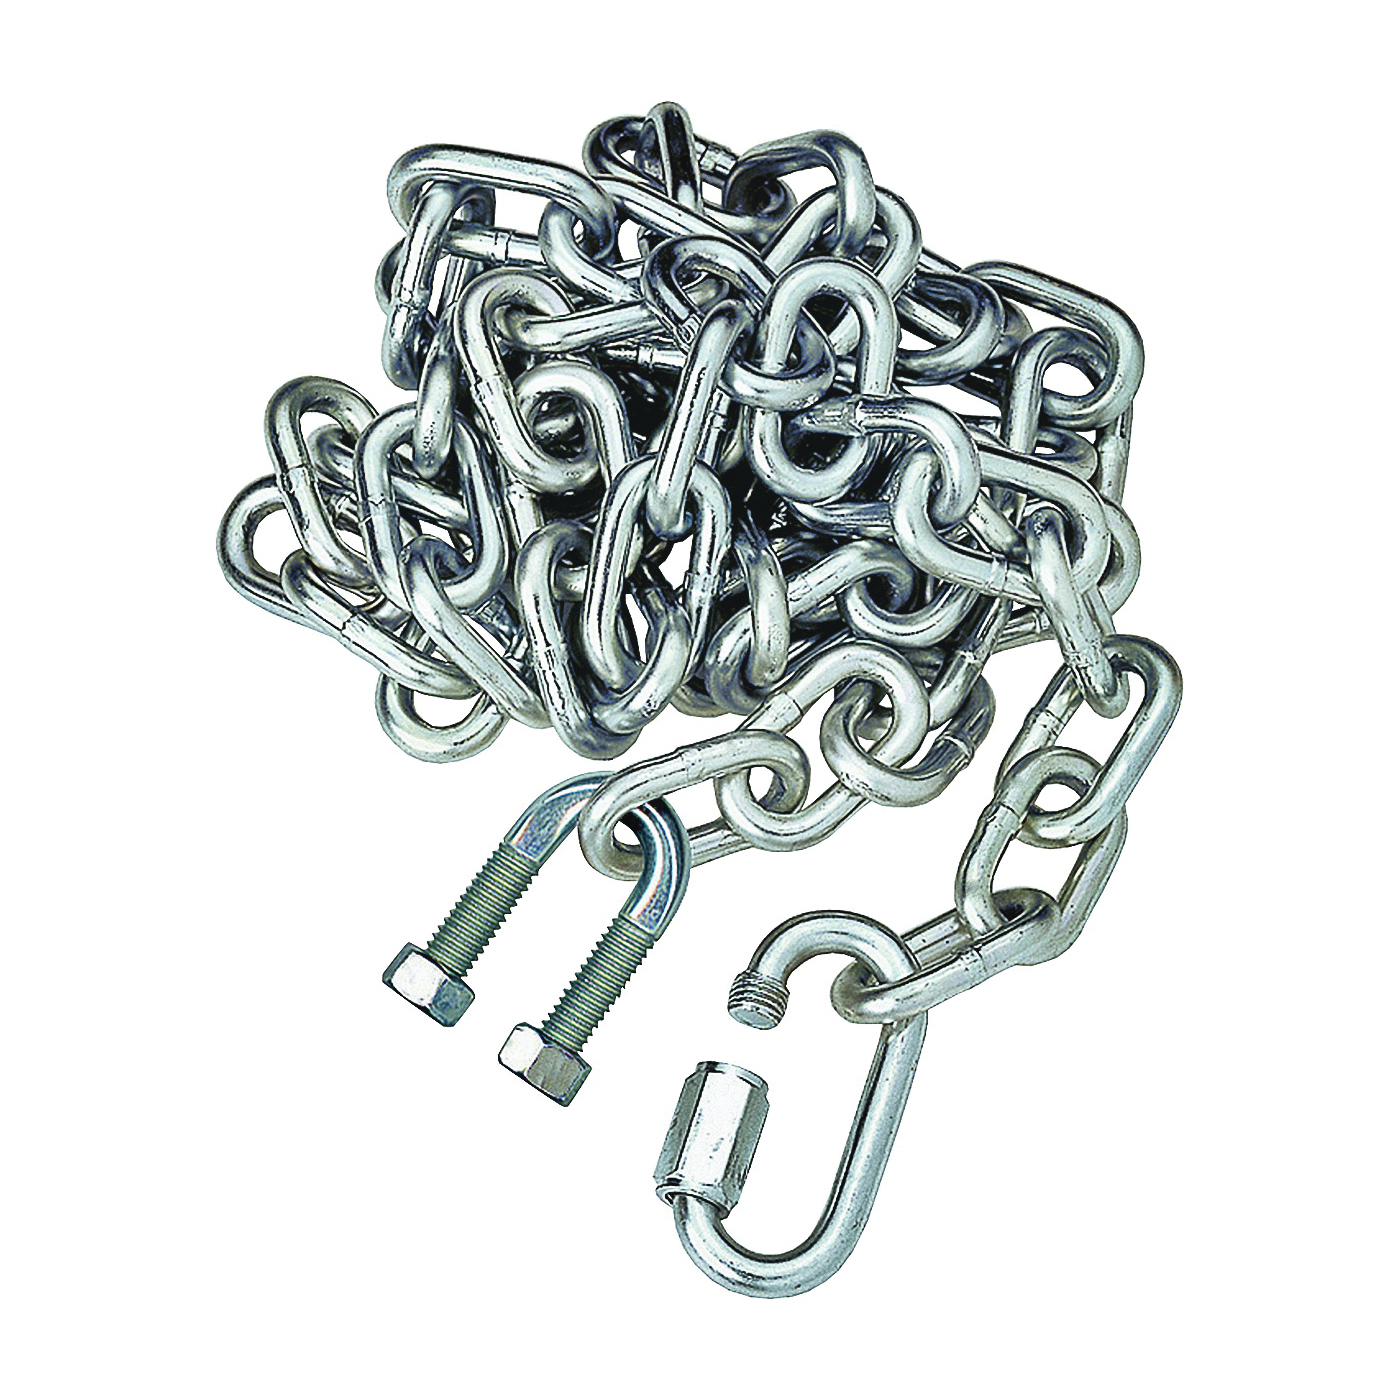 7007600 Towing Safety Chain, 36 in L, 5000 lb Working Load, Steel, Zinc